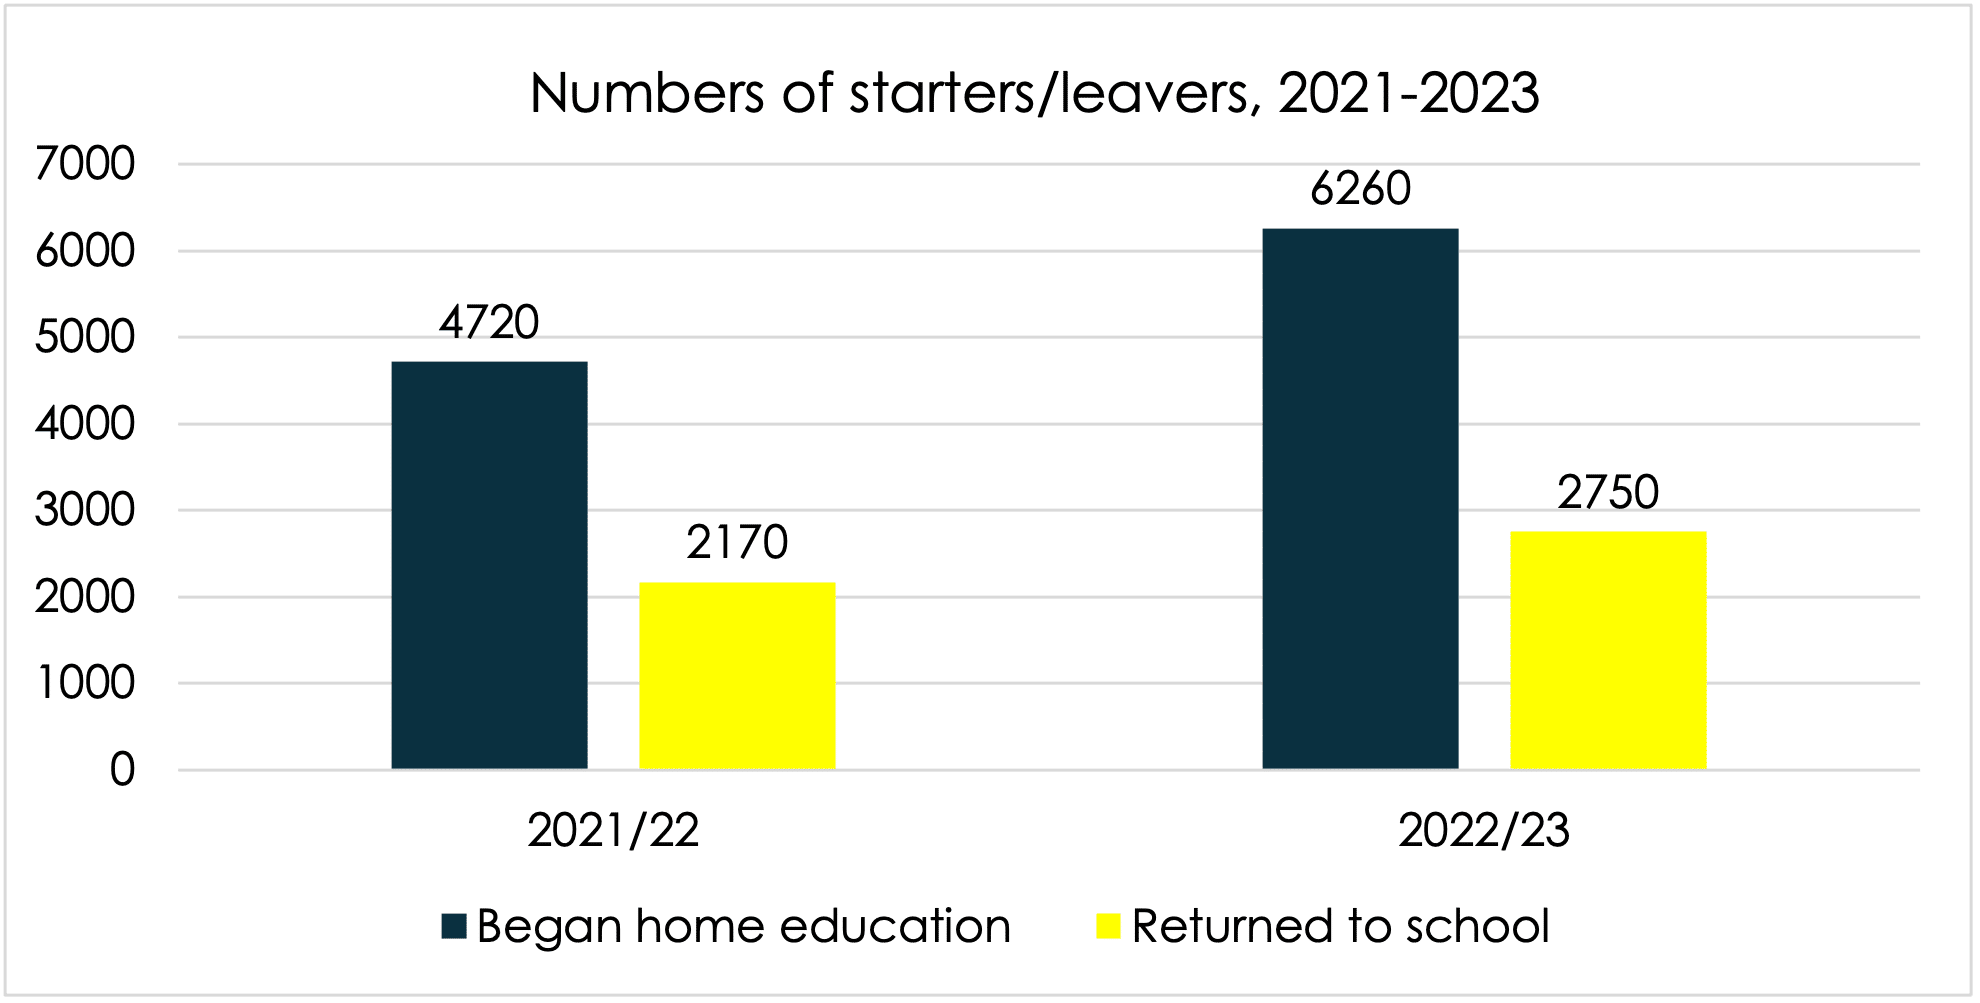 This chart depicts the number of young people withdrawing from school for home education and the numbers returning to school from home education for the years 2021-22 and 2022-23. It shows that, in the full school year 2021/22, approximately 2,170 young people that were previously home educating returned to school, increasing to 2,750 during the 2022/23 school year. There was, however, a larger increase in those withdrawing from school and starting to home educate. This increased from 4,720 in 2021/22 to 6,260 in 2022/23.